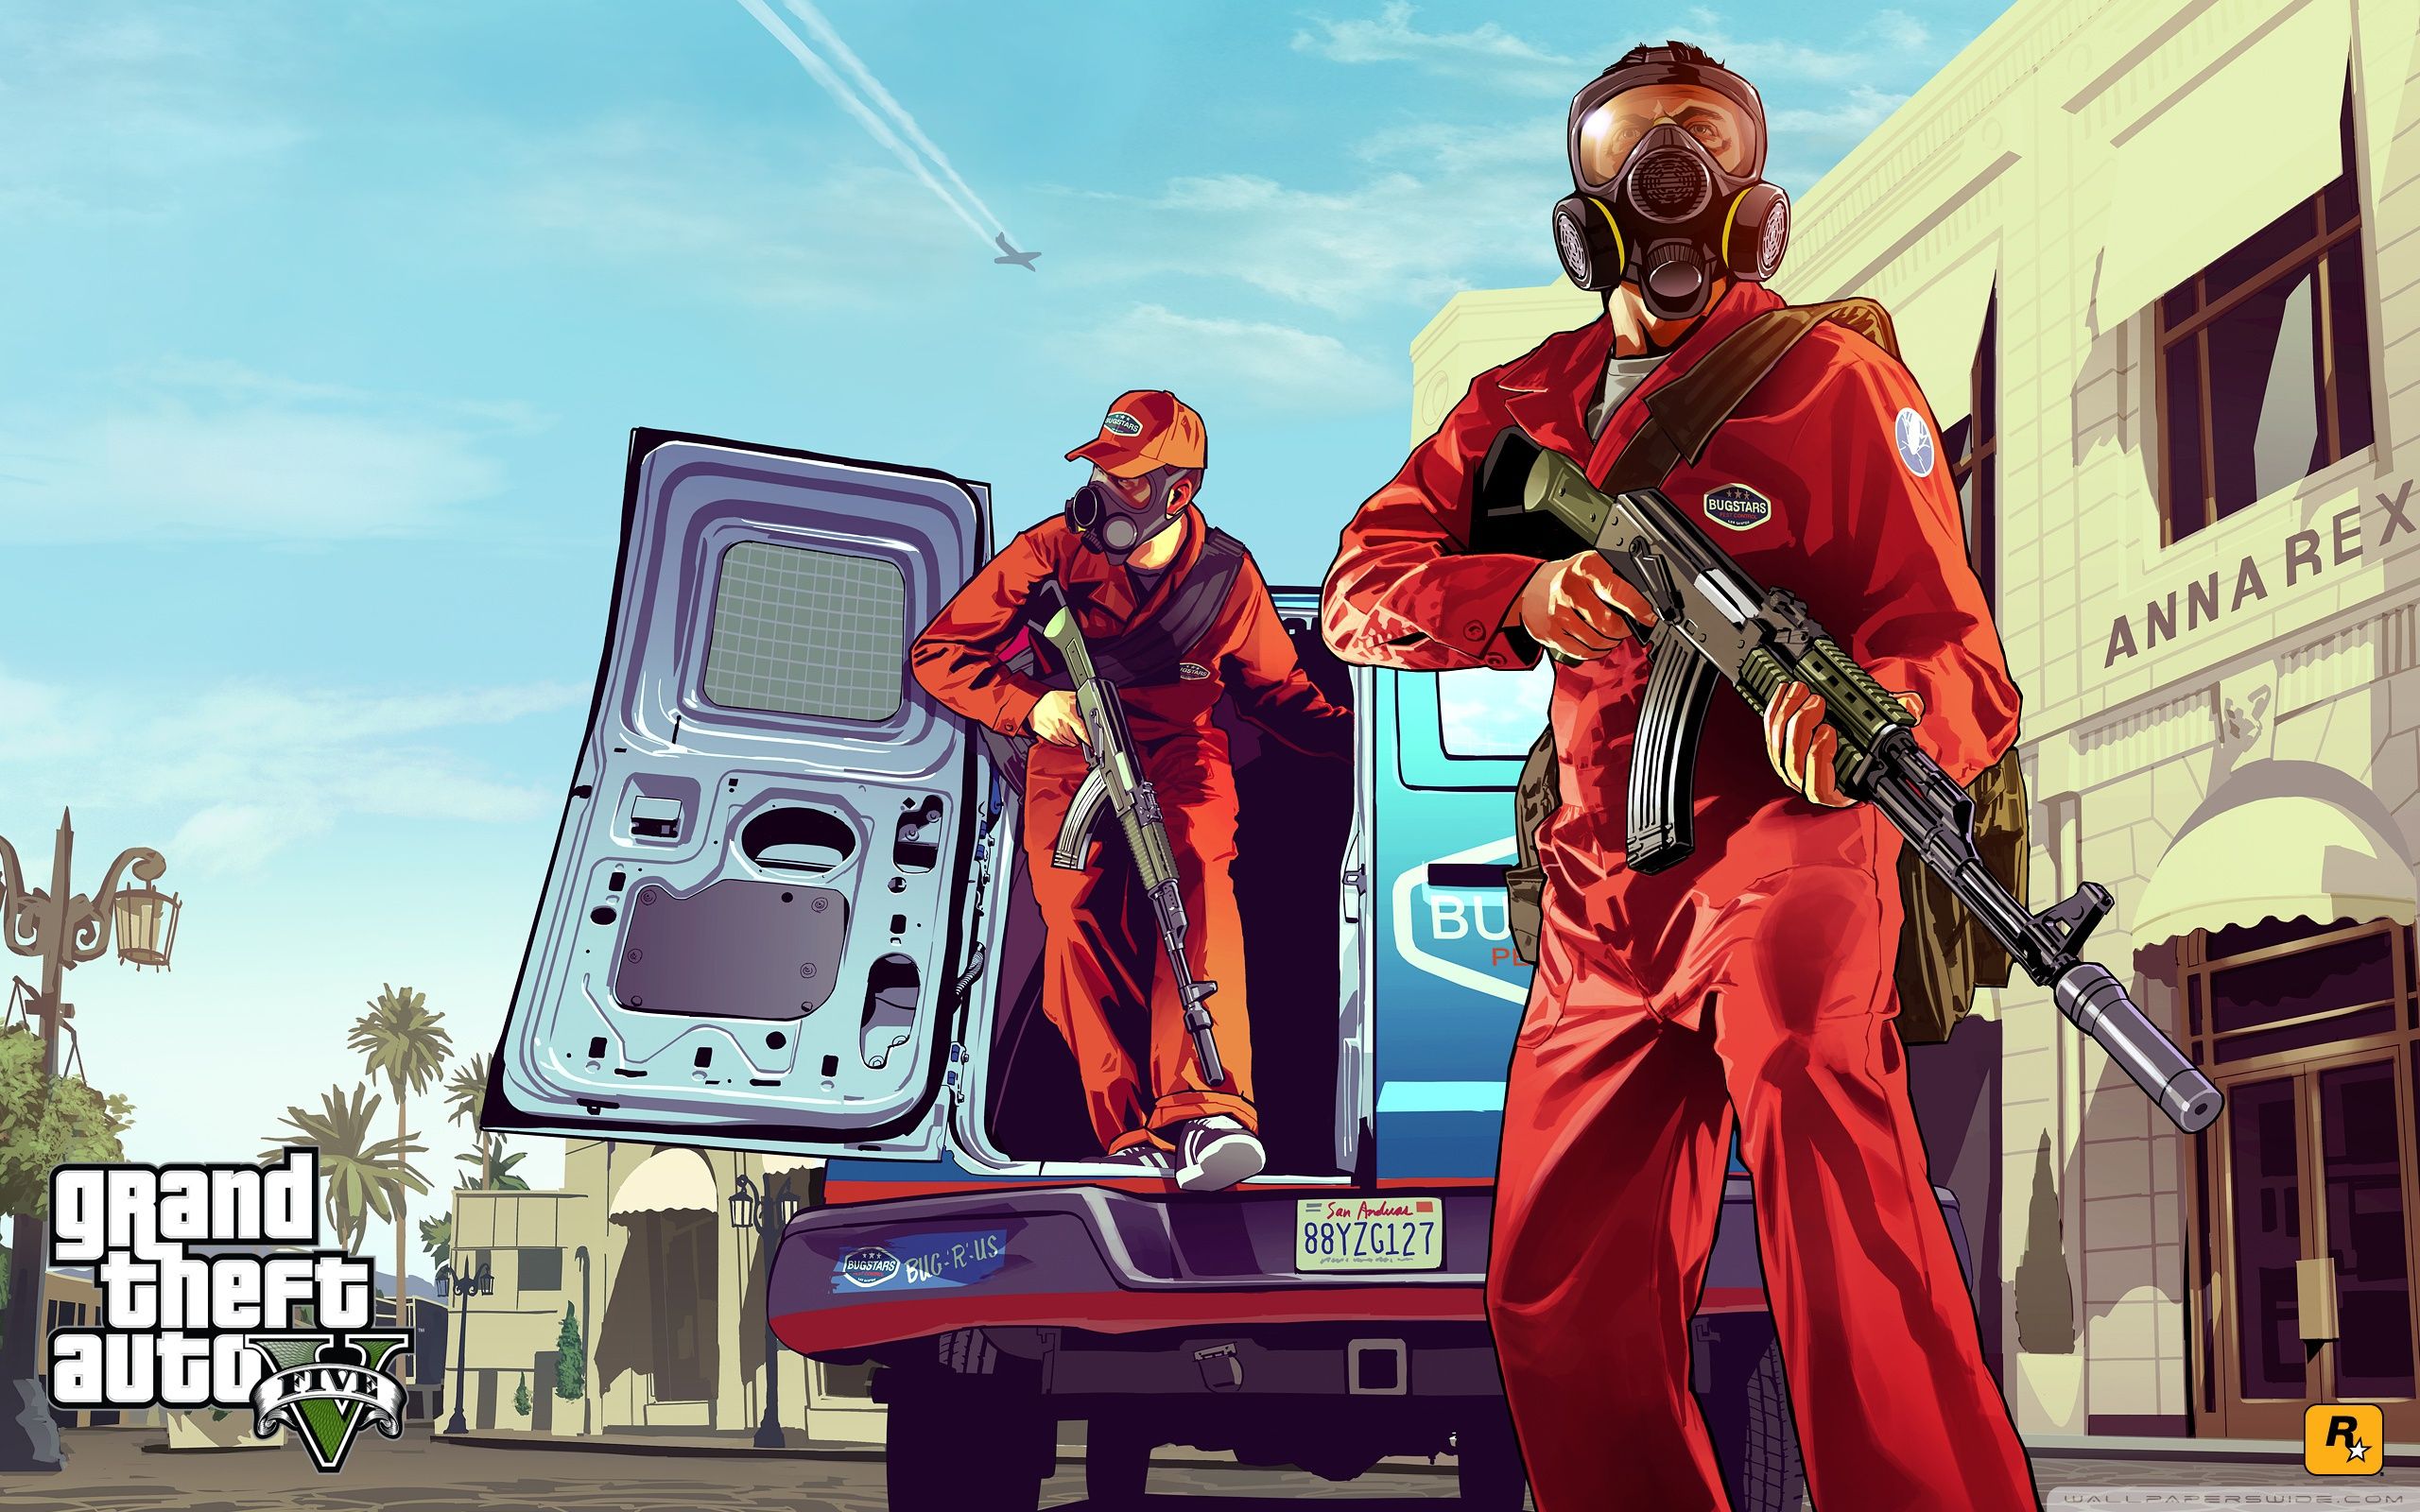 gta 5 wallpaper for pc,fictional character,outerwear,costume,games,vehicle